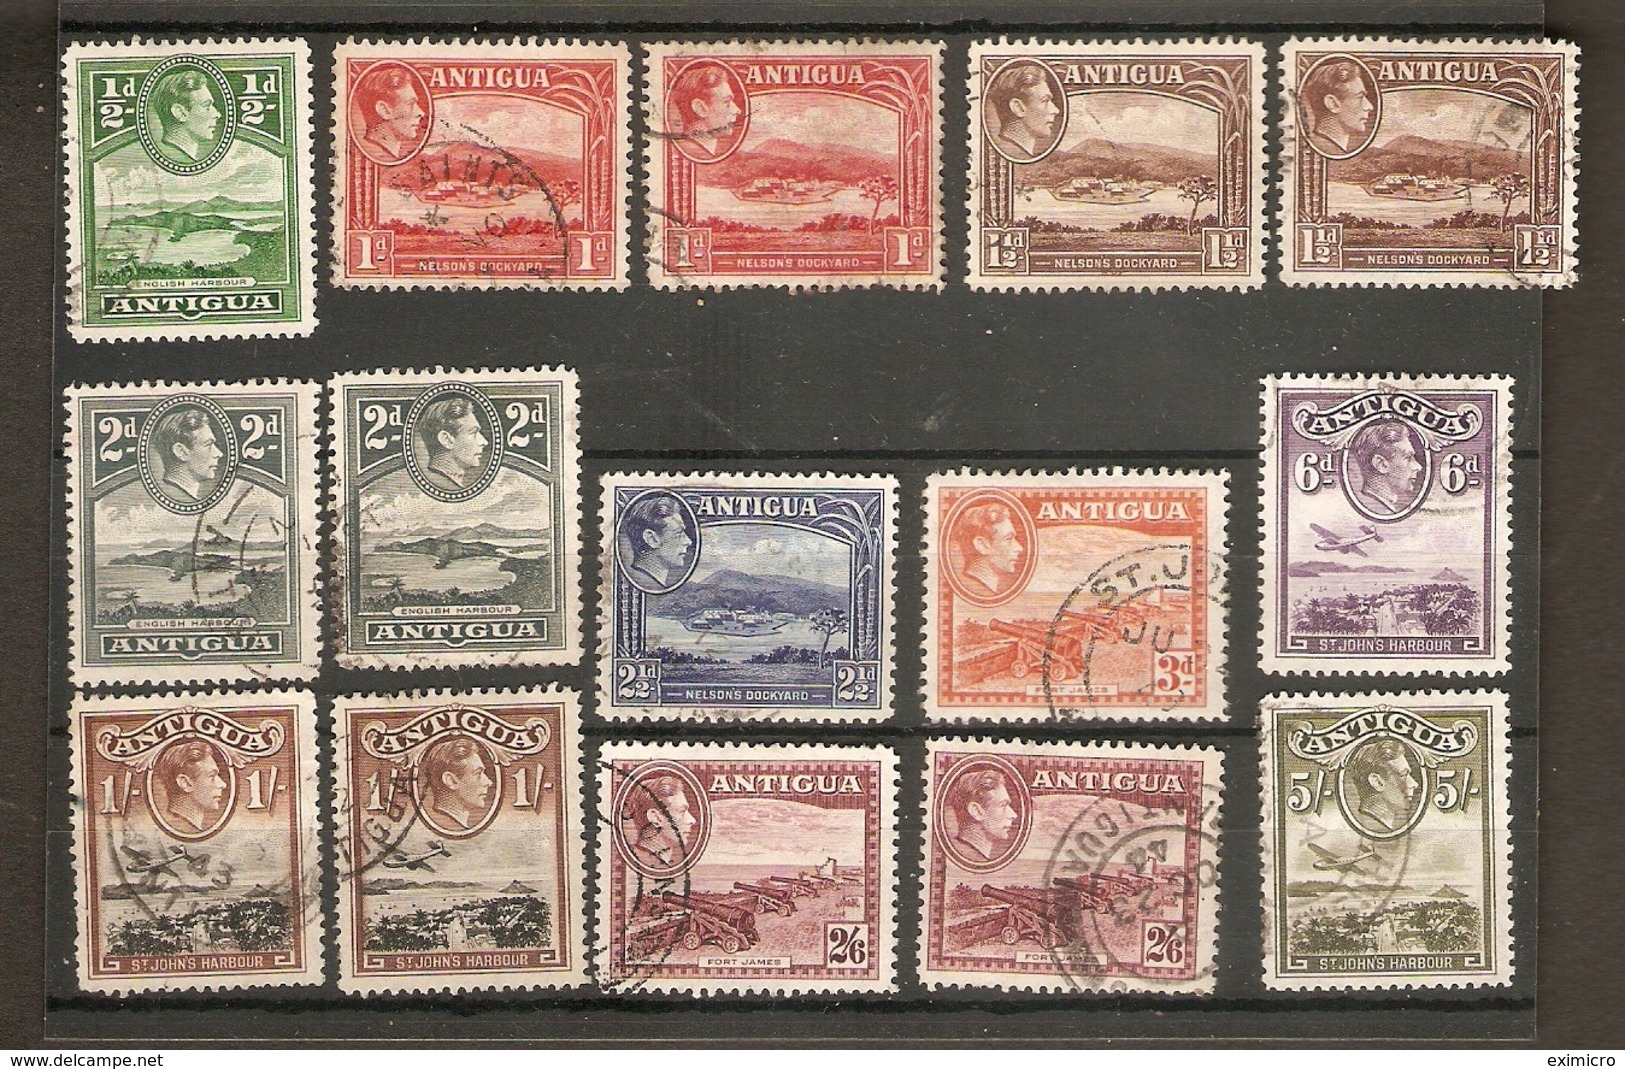 ANTIGUA 1938 - 1951 ALL DIFFERENT SET TO 5s INCLUDING COLOUR VARIETIES SG 98/107 FINE USED Cat £100+ - 1858-1960 Crown Colony